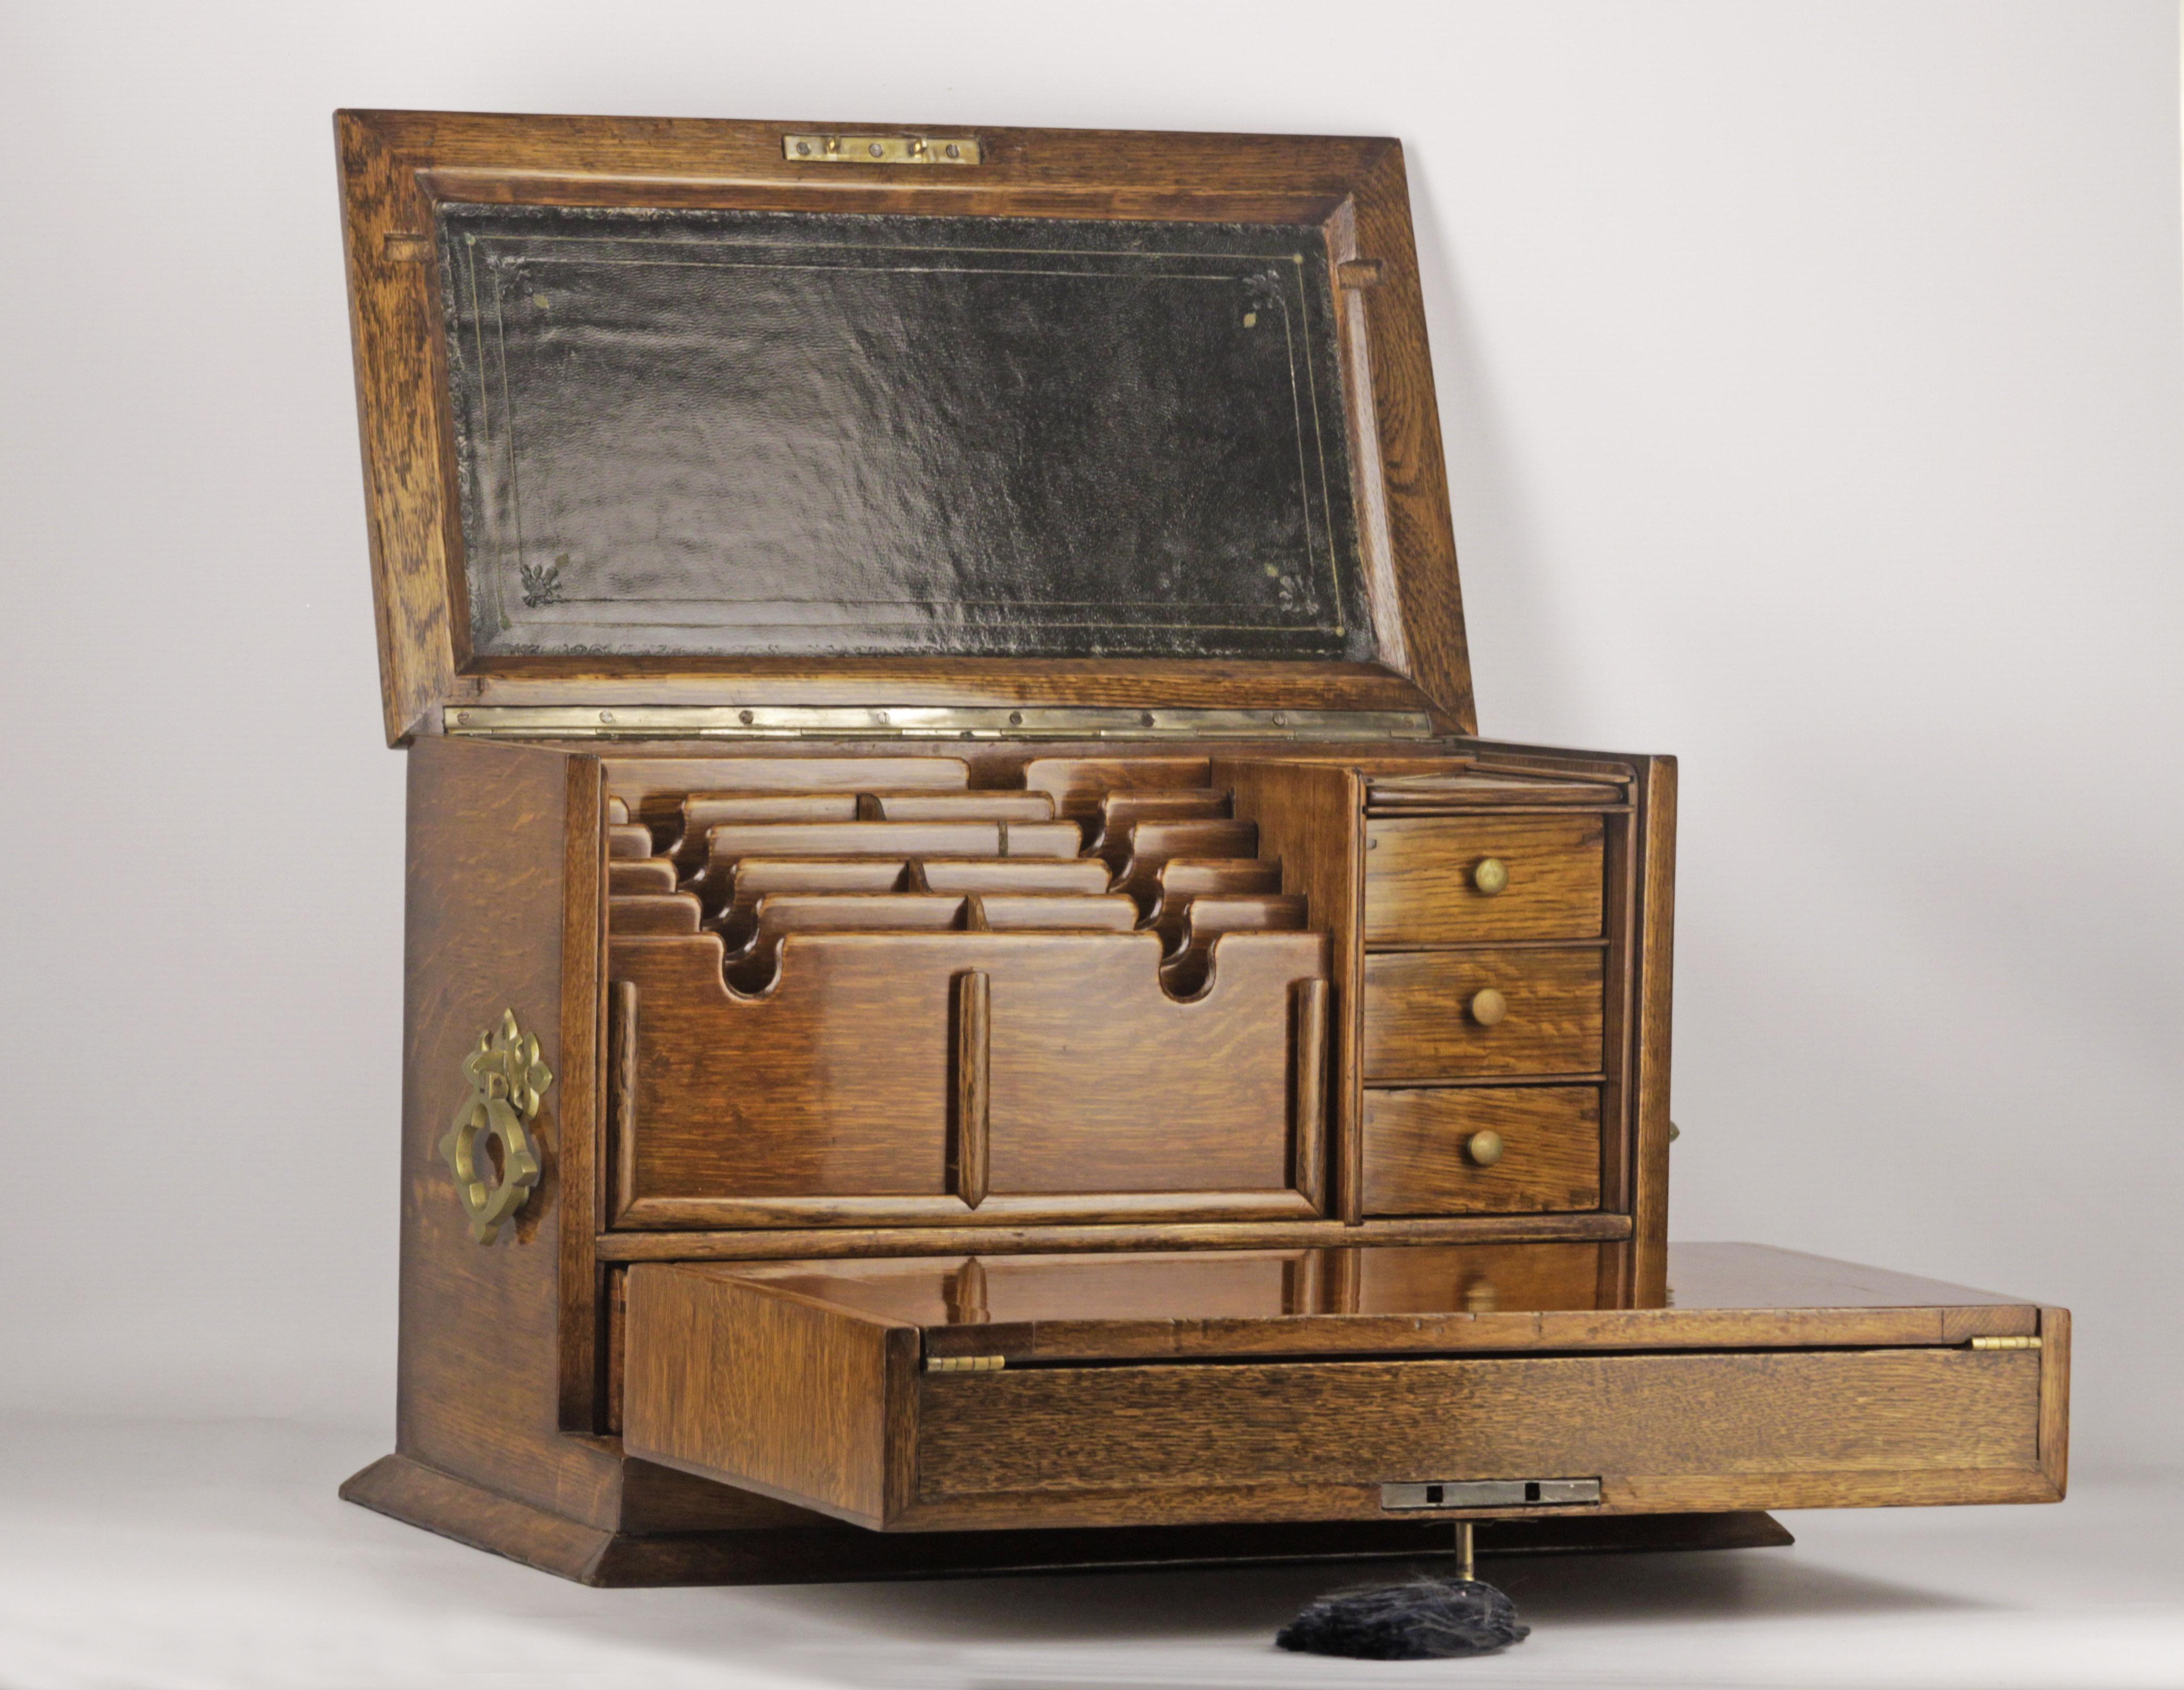 Antique Writing slope, Notary Desk or Travel Correspondence Box in oak, dating to the Edwardian period. Origin England, Circa 1910. The wood in the box is perfectly preserved showing a patina in good condition according to the age of the piece. The